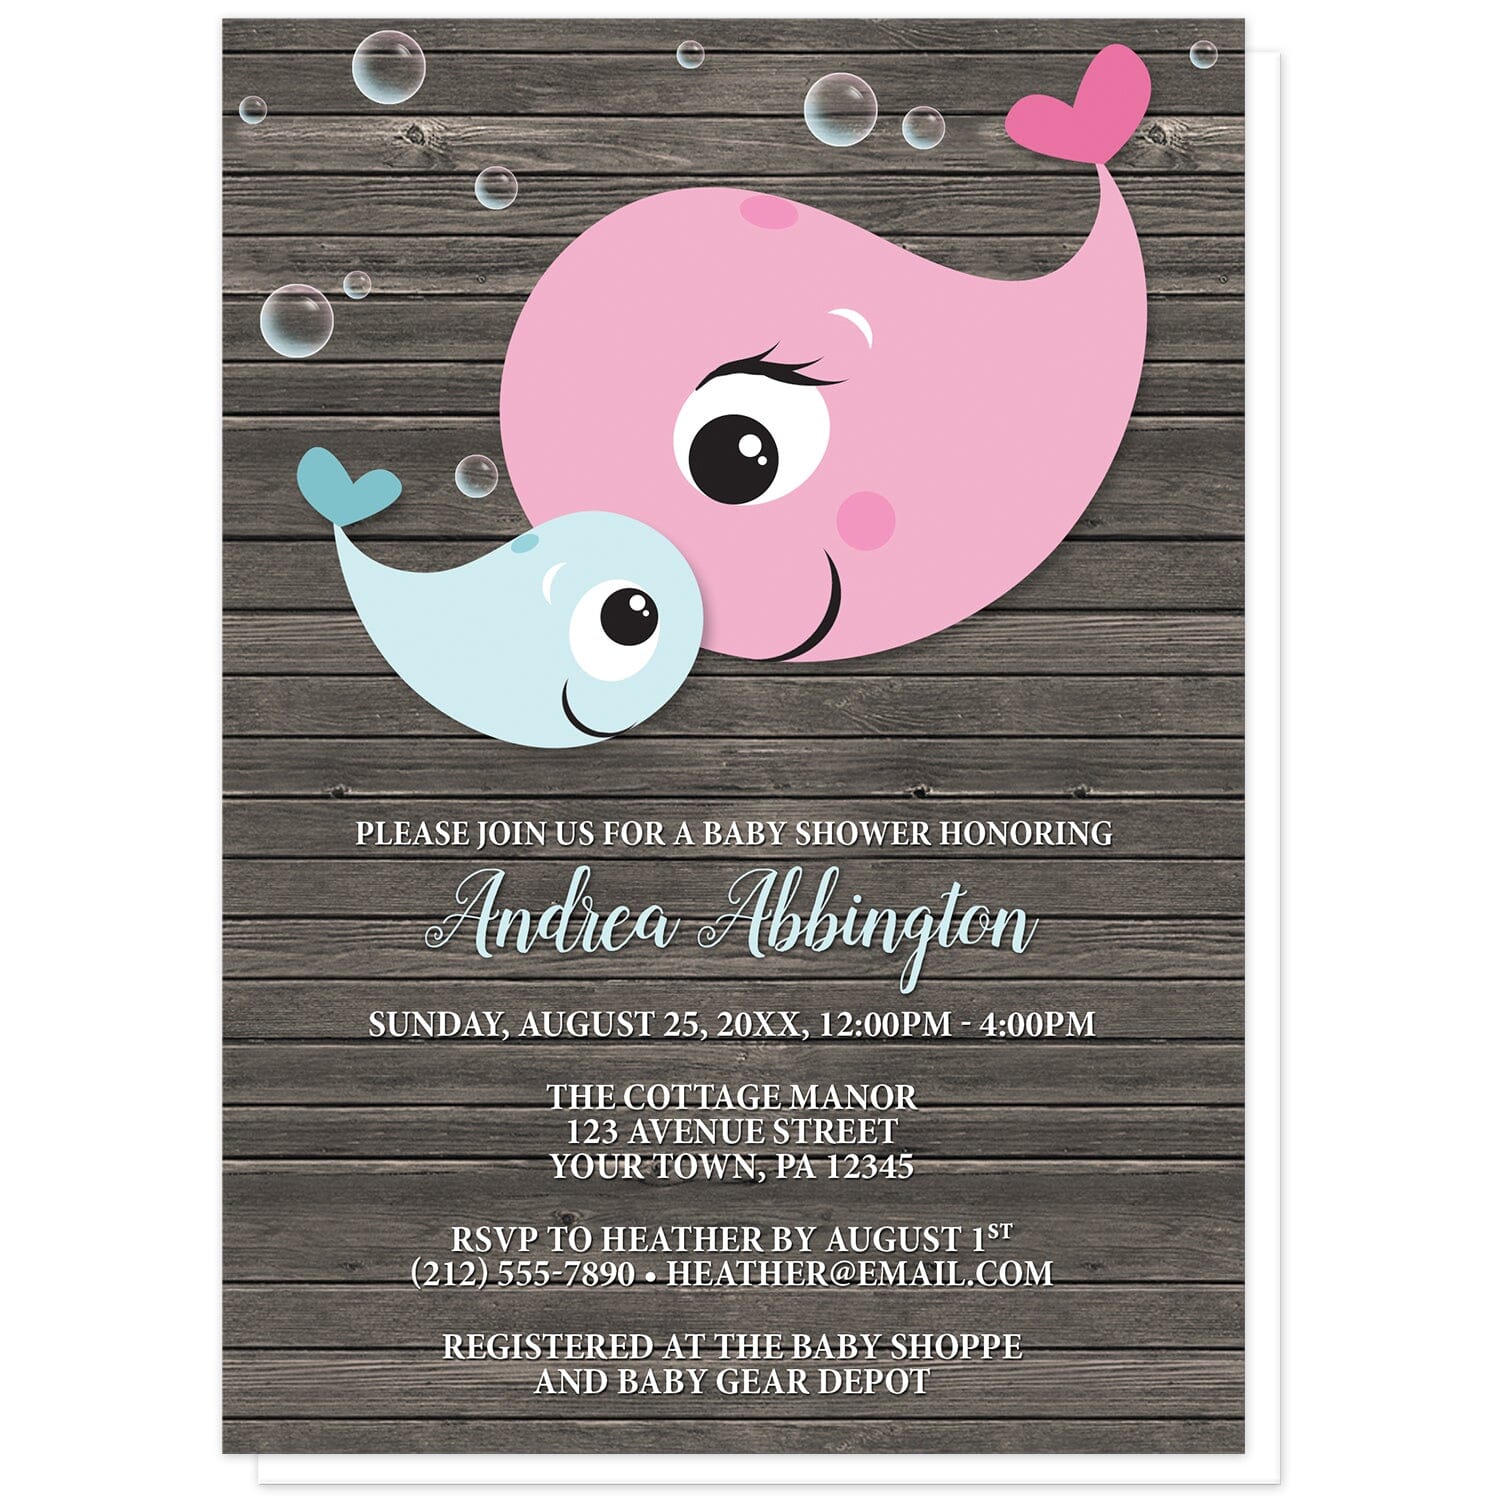 Mommy Baby Boy Whale Rustic Wood Baby Shower Invitations at Artistically Invited. Mommy baby boy whale rustic wood baby shower invitations with a cute illustration of a pink mommy whale and blue baby whale with translucent bubbles around them, over a dark brown wood background. Your personalized baby shower celebration details are custom printed in white with the mom-to-be's name printed in a light blue script font over the wood background.